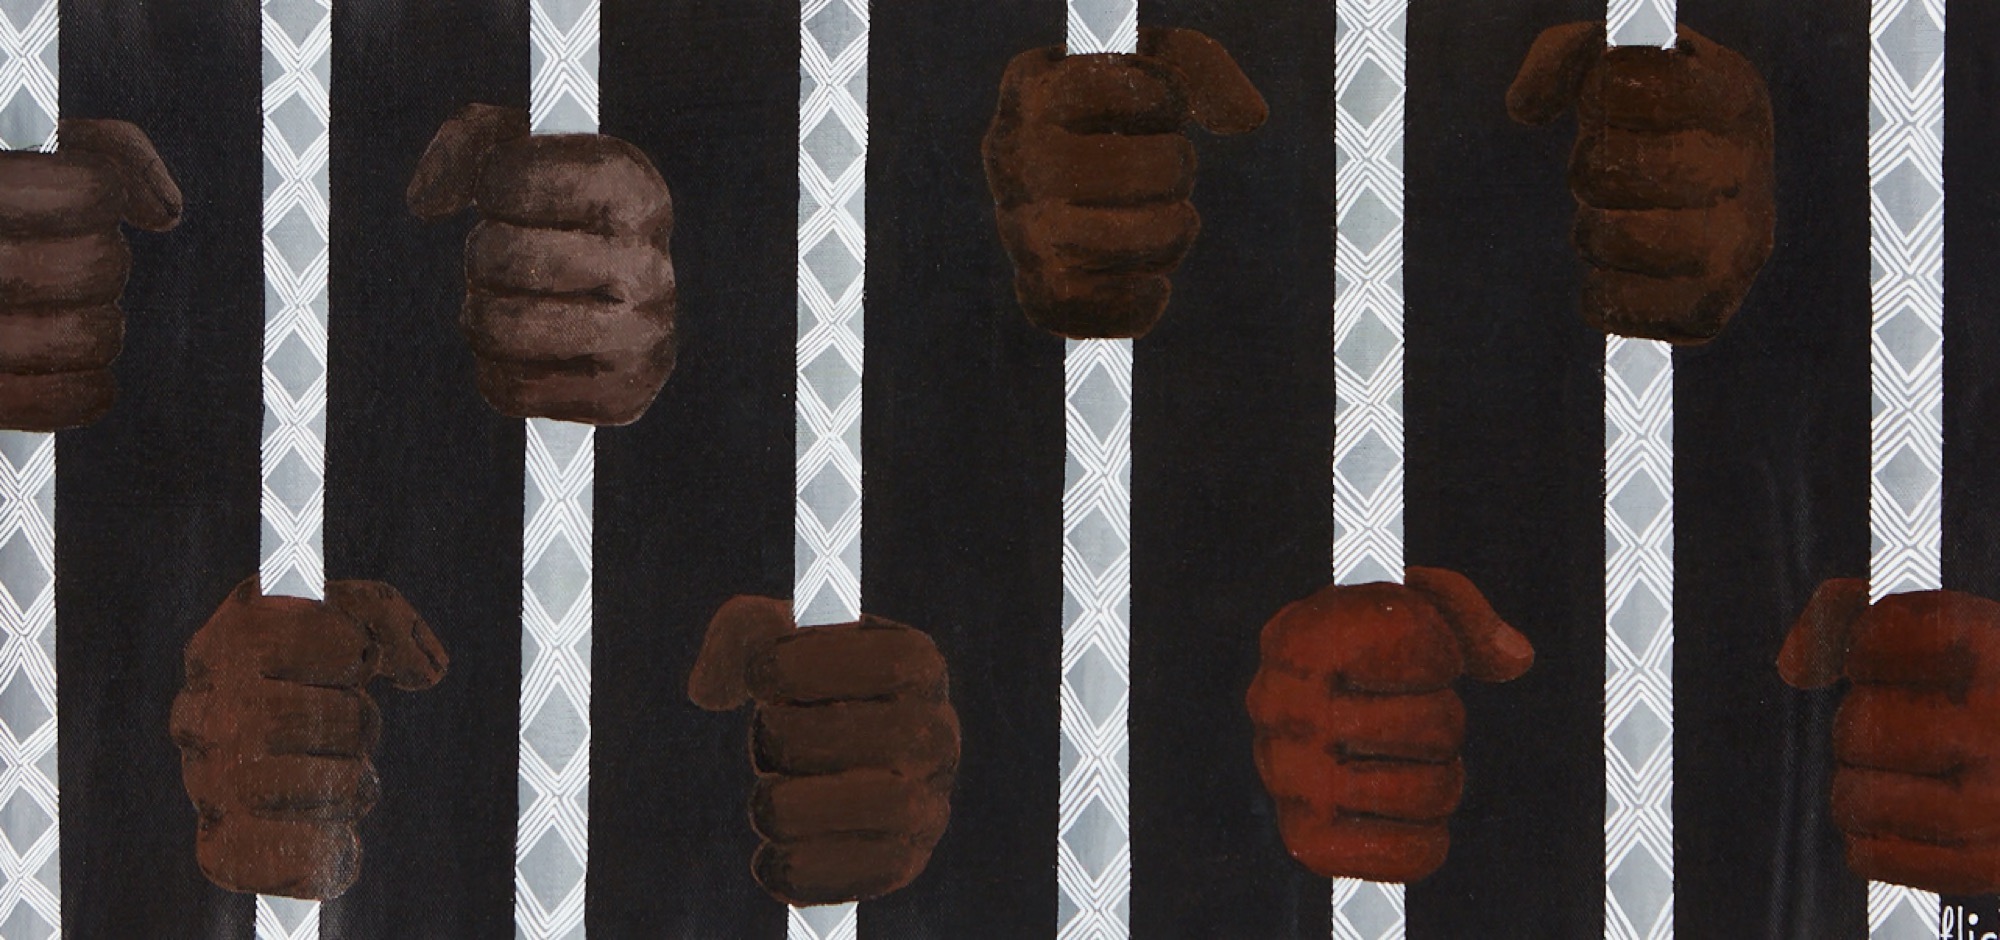 Felicity Chafer-Smith (Ngarrindjeri people), Black Bodies Behind Bars, 2020. Photo: Mick Bell